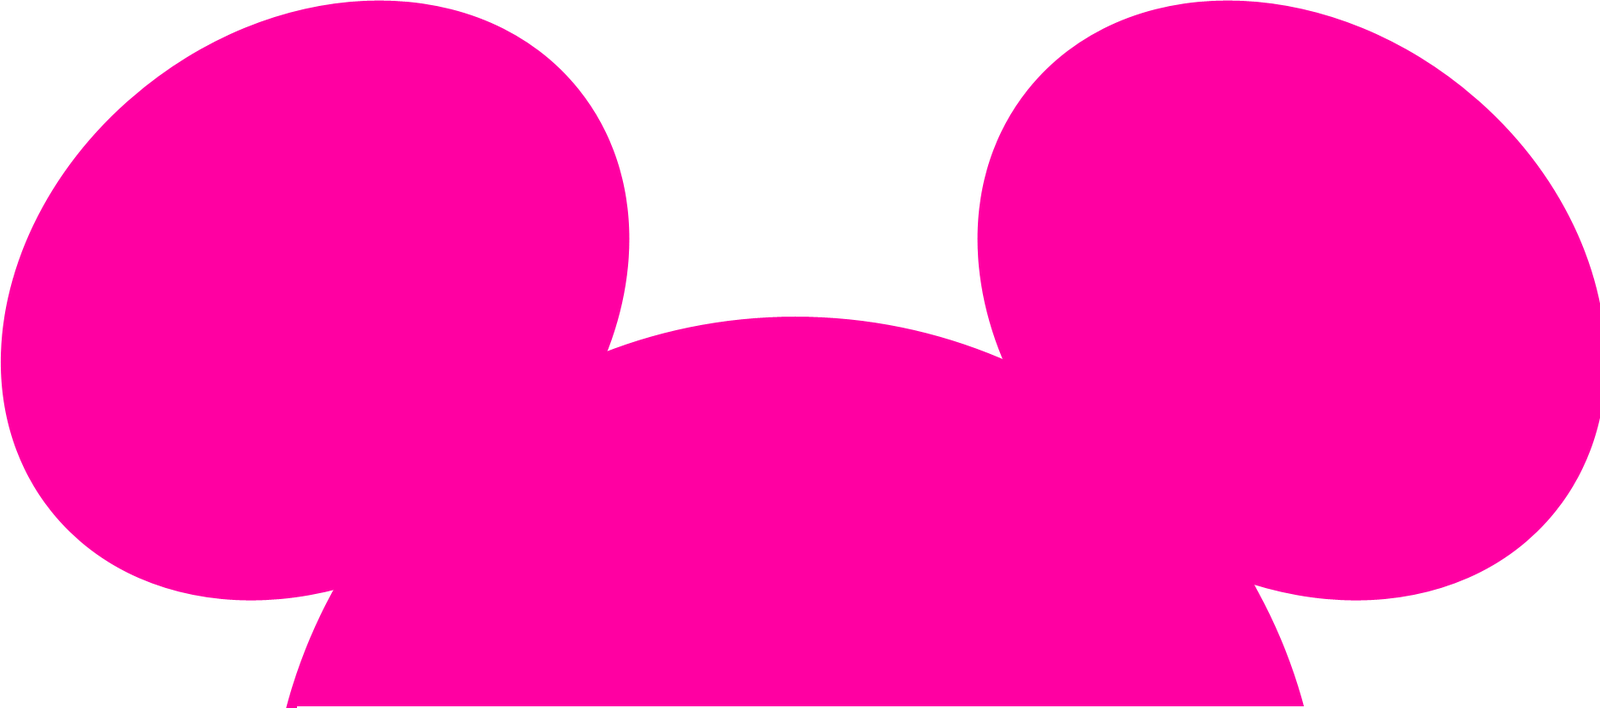 Minnie Mouse Ears Pink Silhouette